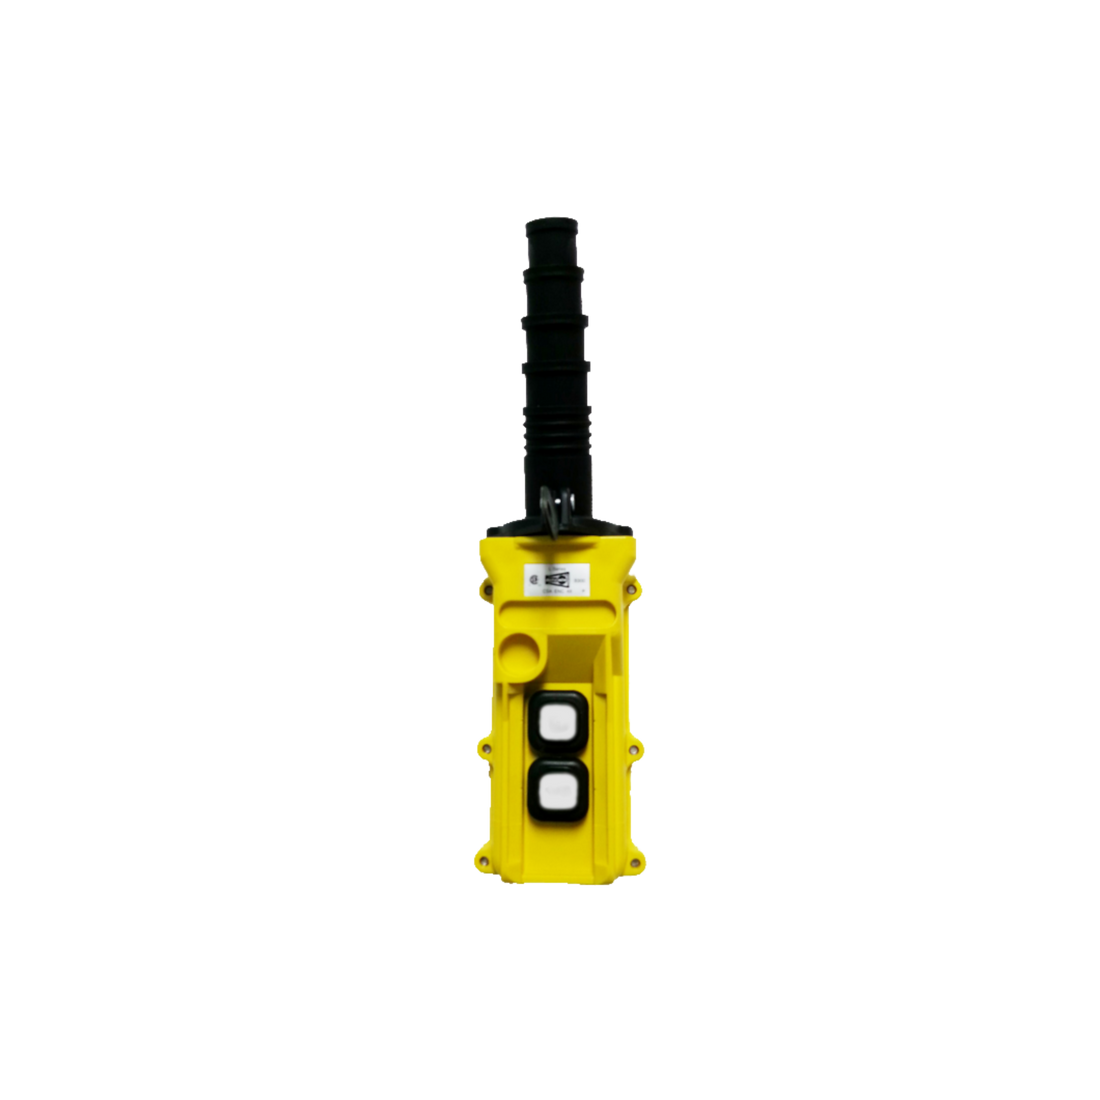 2-Button Pendant, Single-, Dual-Speed Switches (L2-S-1, L2-S-2); Color: Yellow